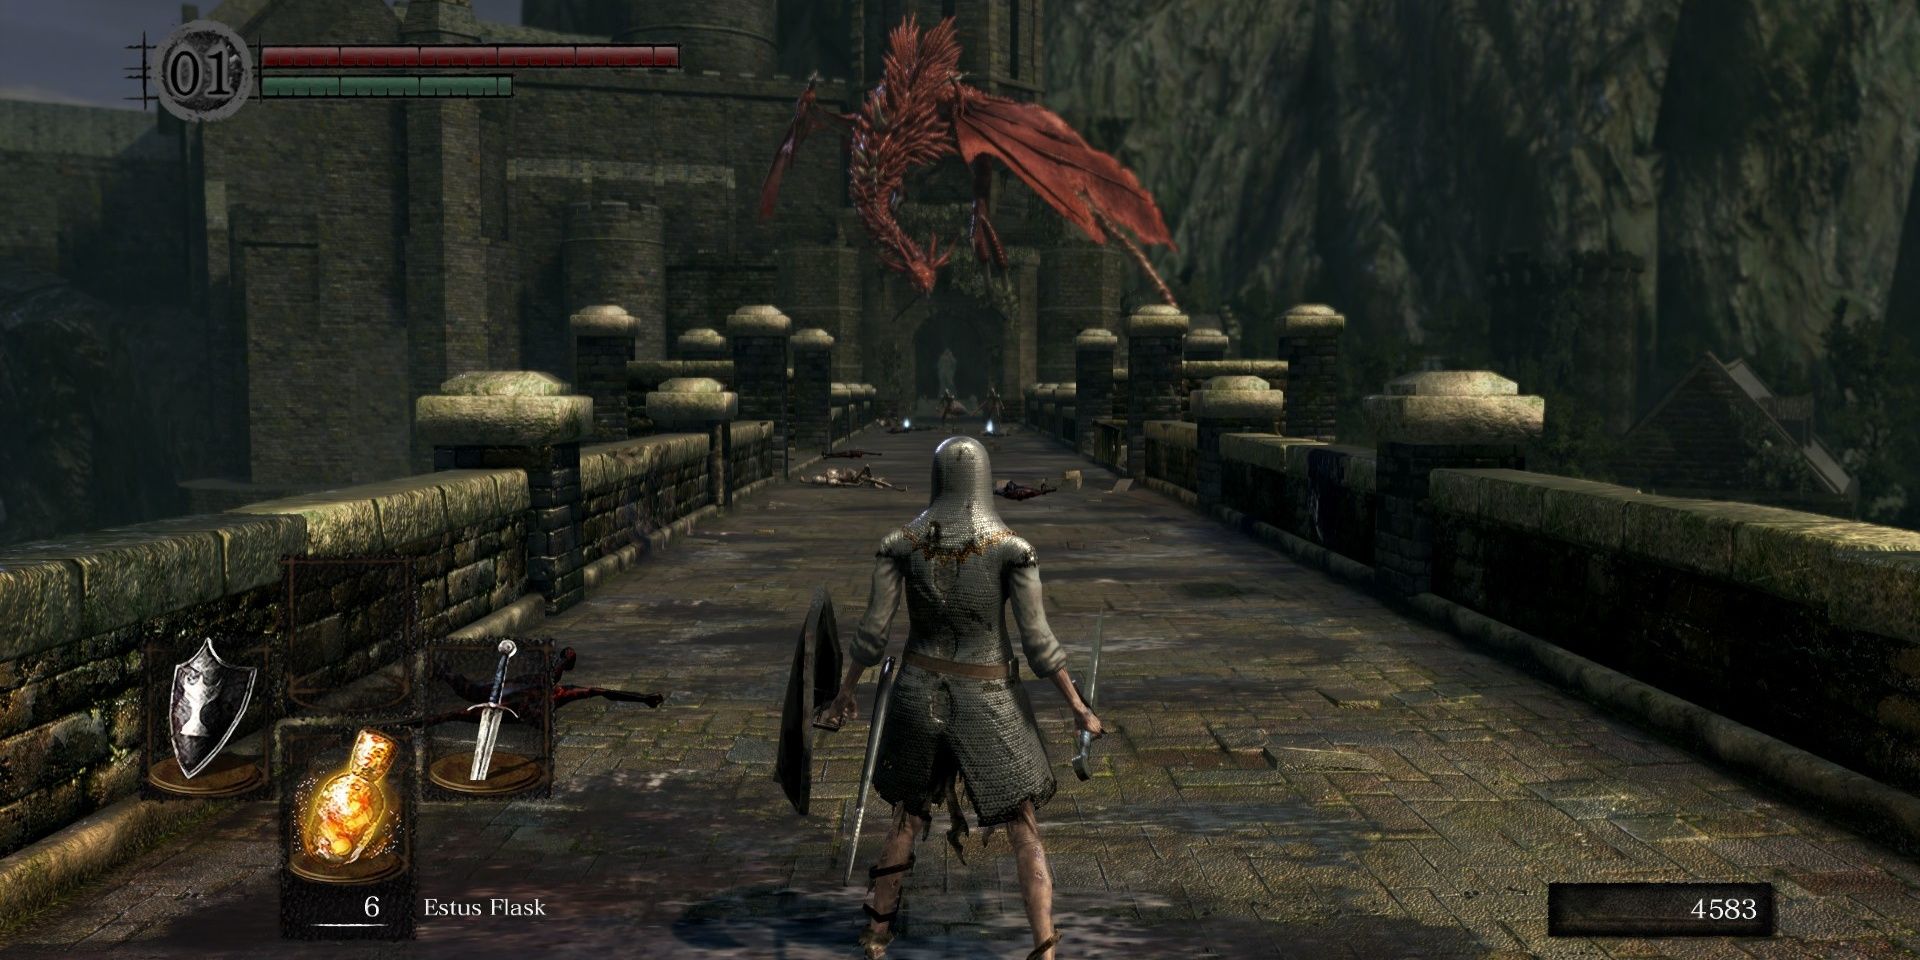 A knight character on a bridge approaches a red dragon